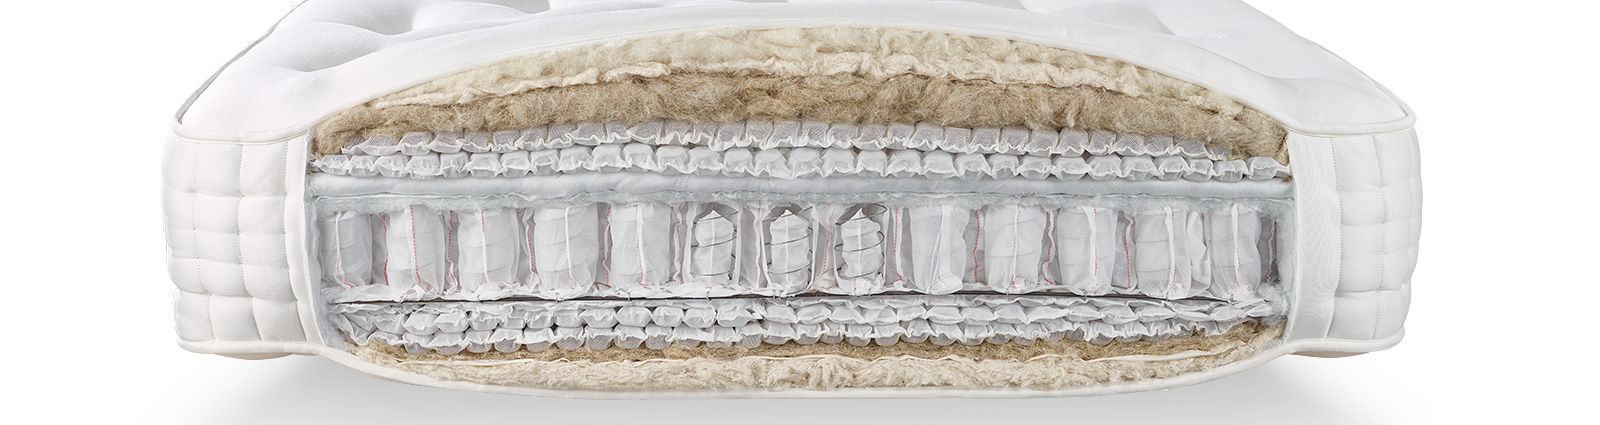 Fillings that provide comfort in a mattress 